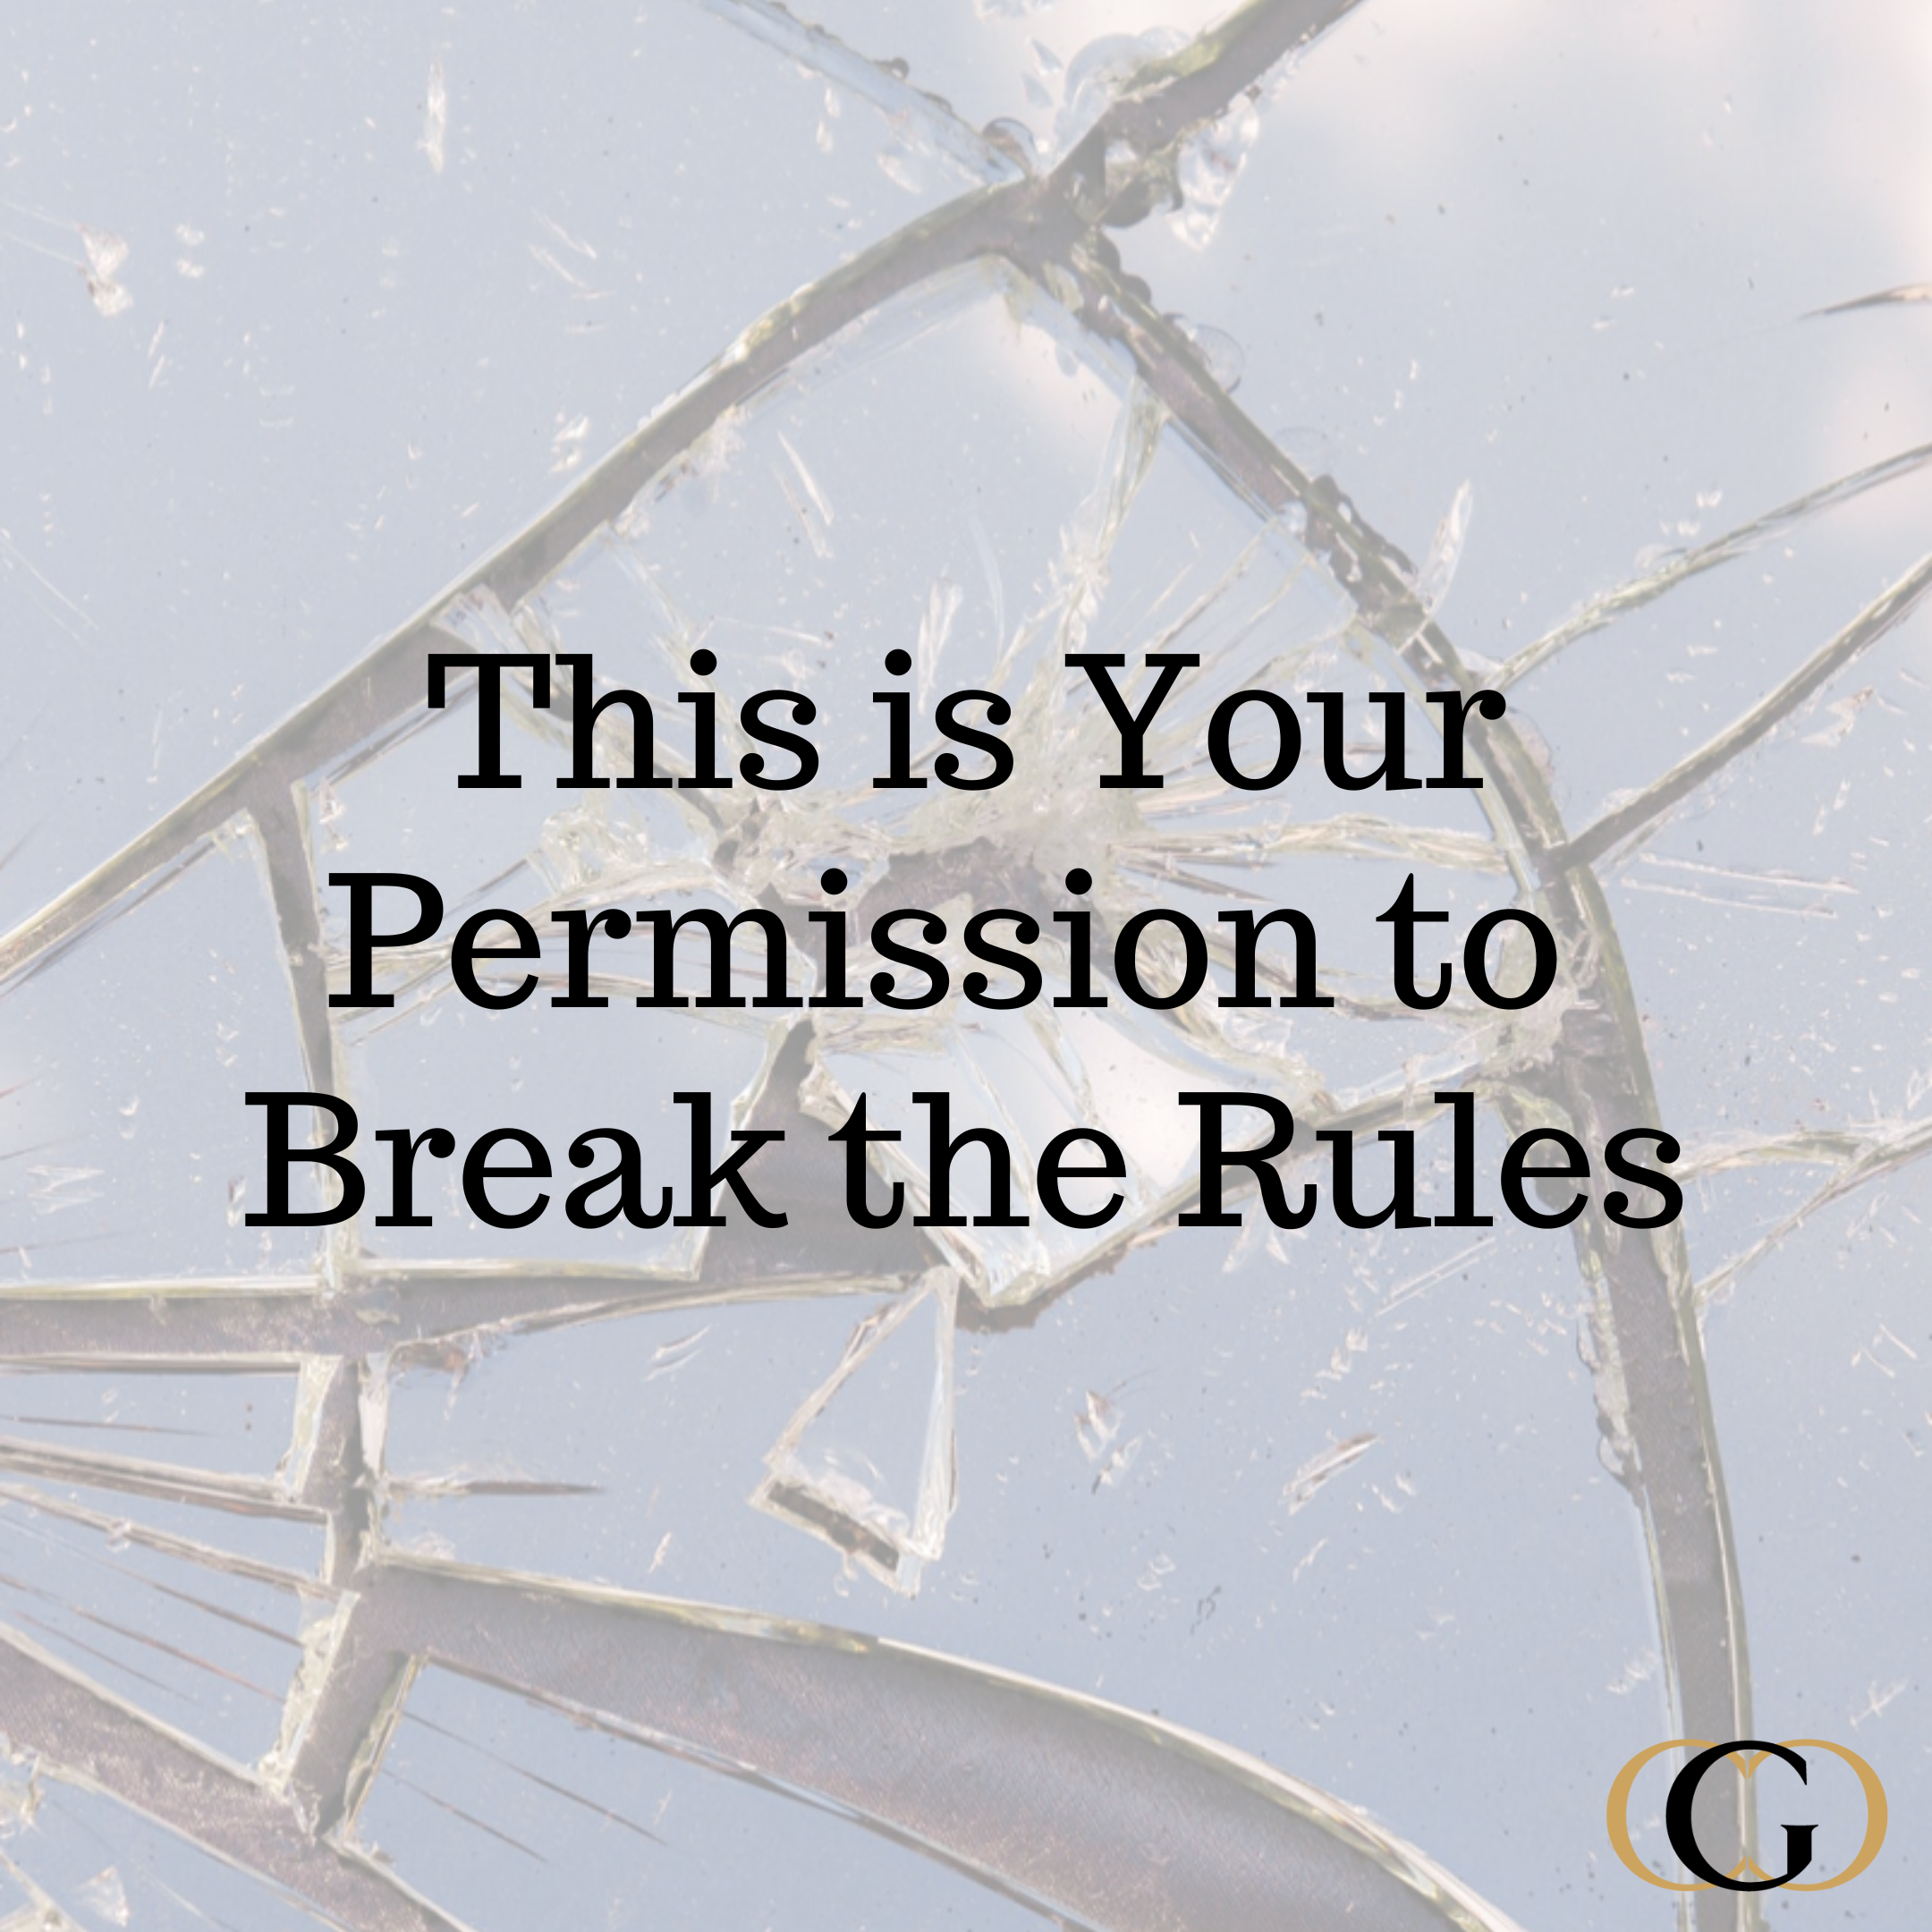 Your Permission to Break the Rules